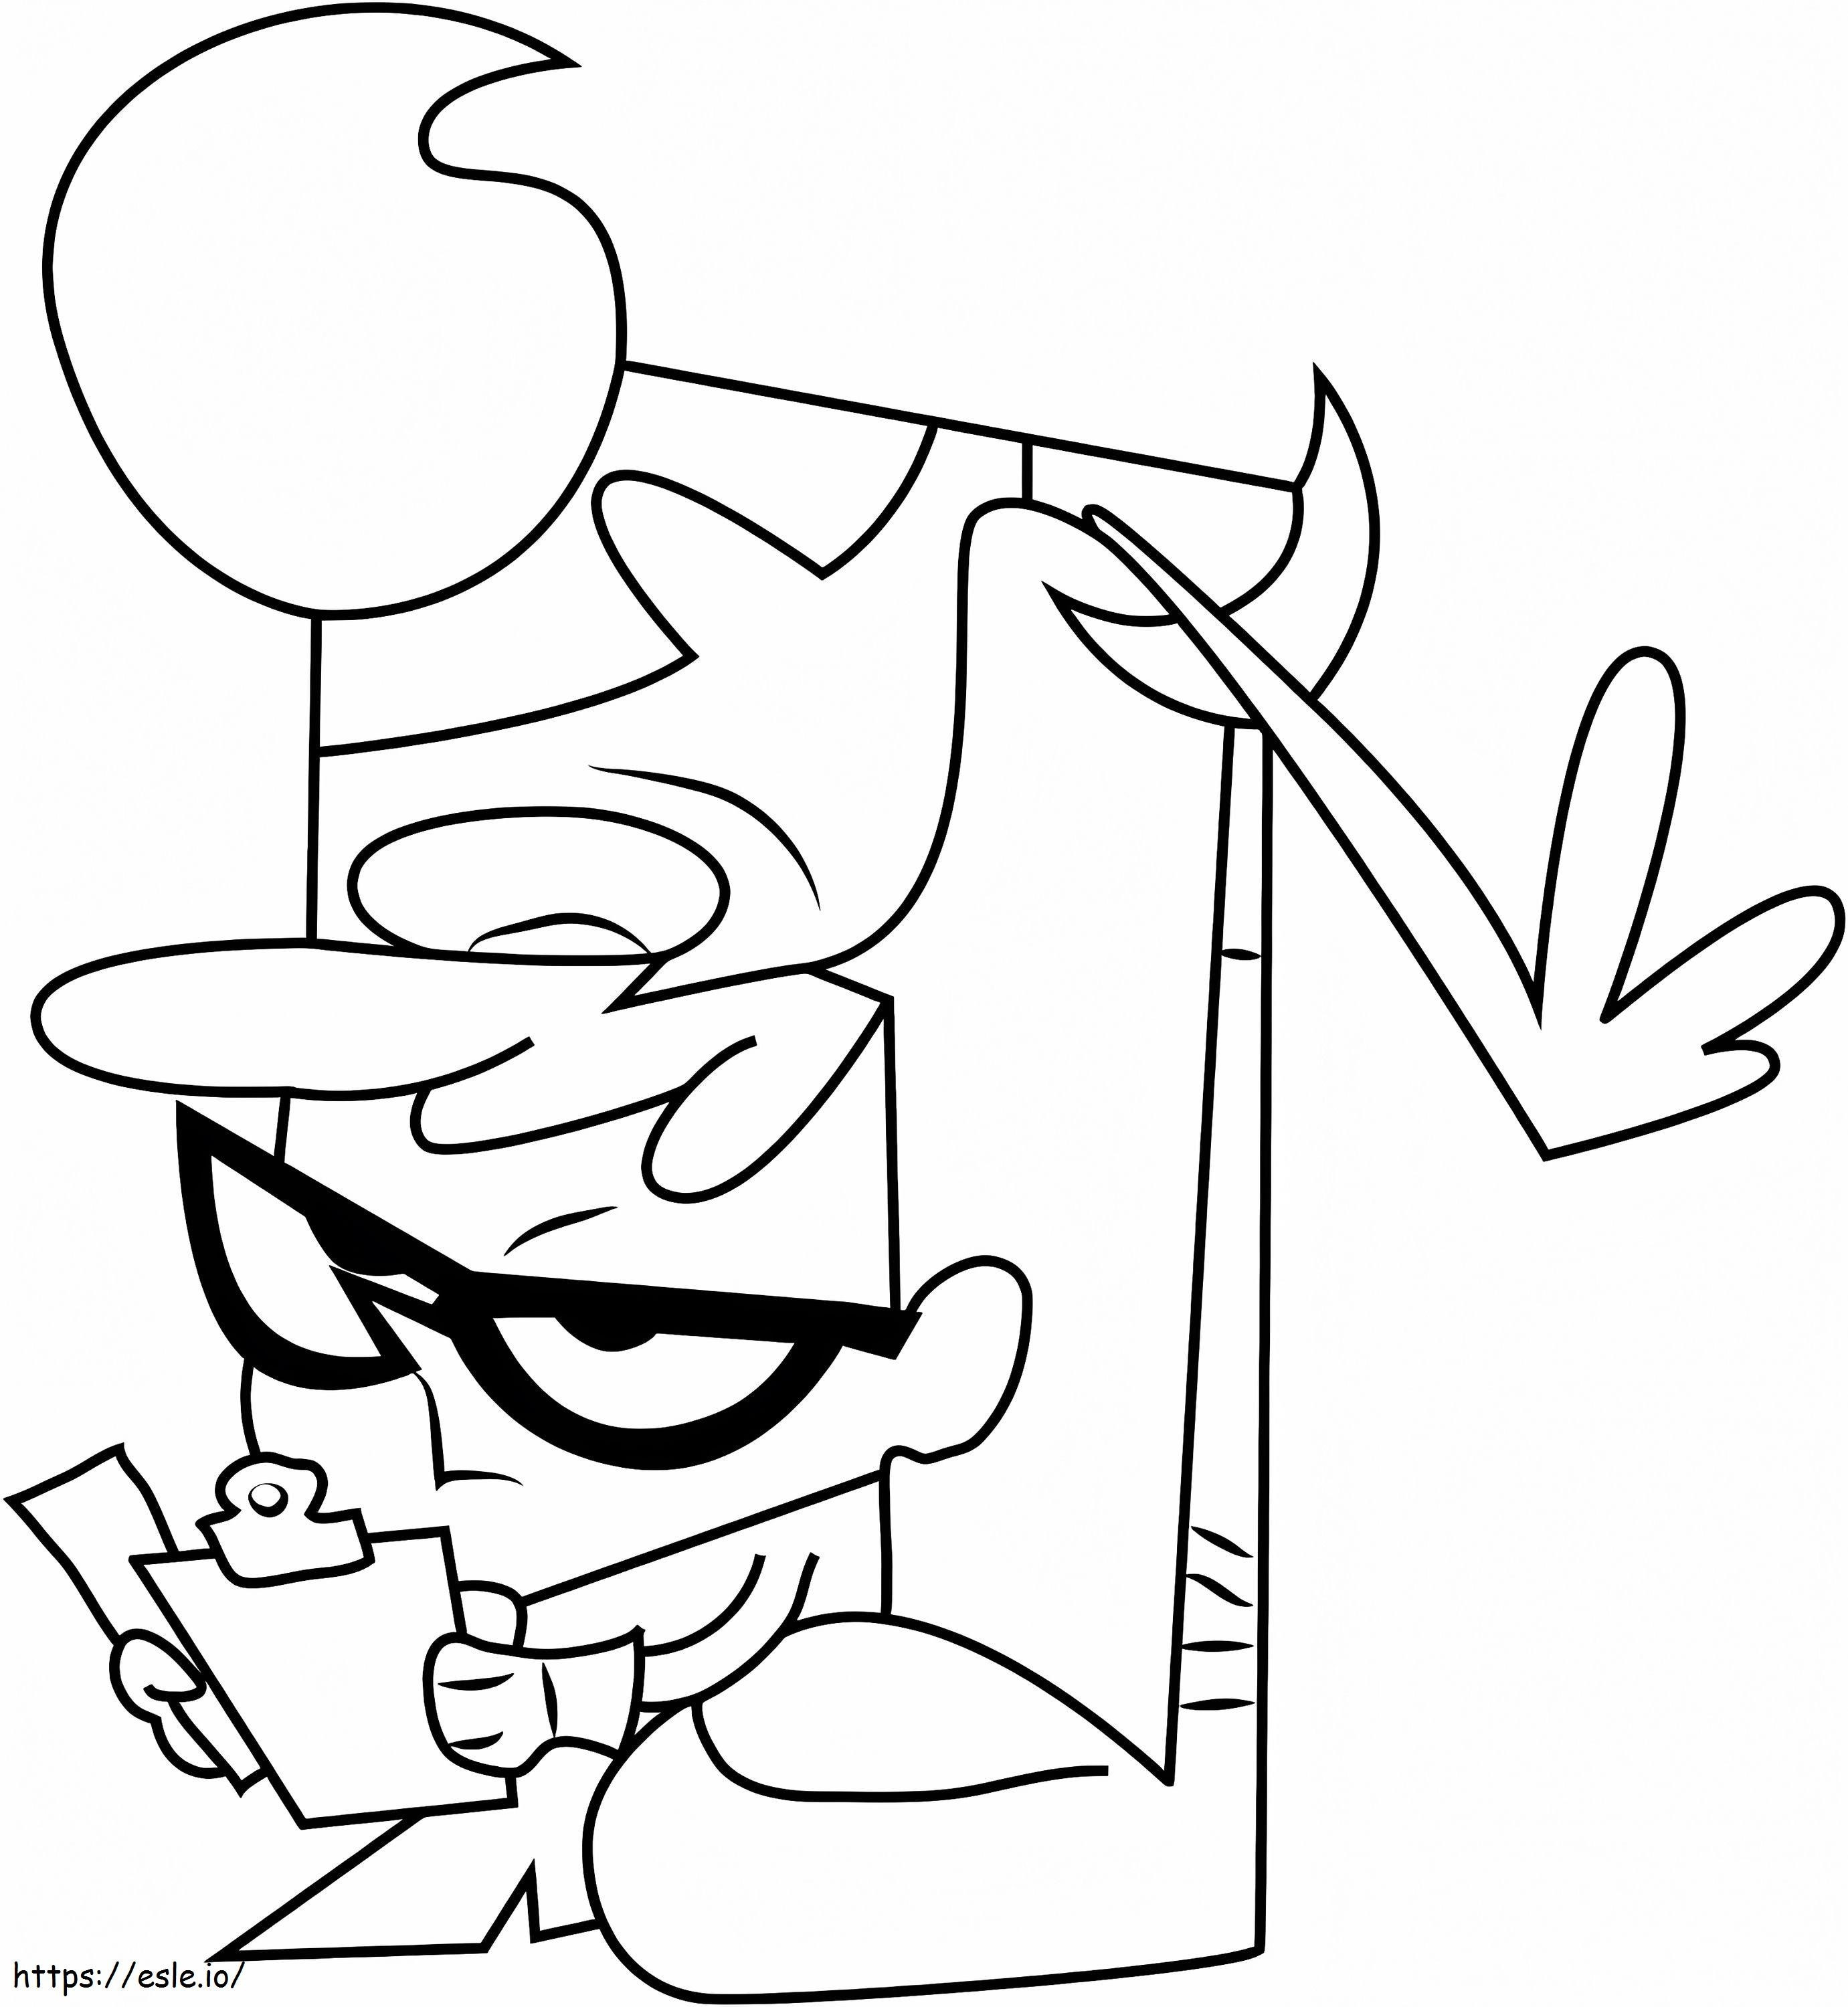 Dee Dee Annoying coloring page